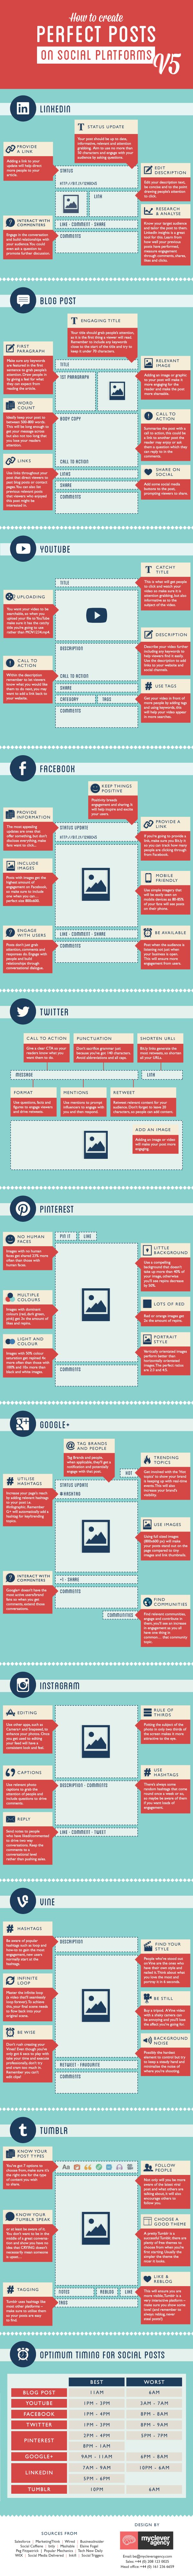 How to Create Perfect Post on Social Media